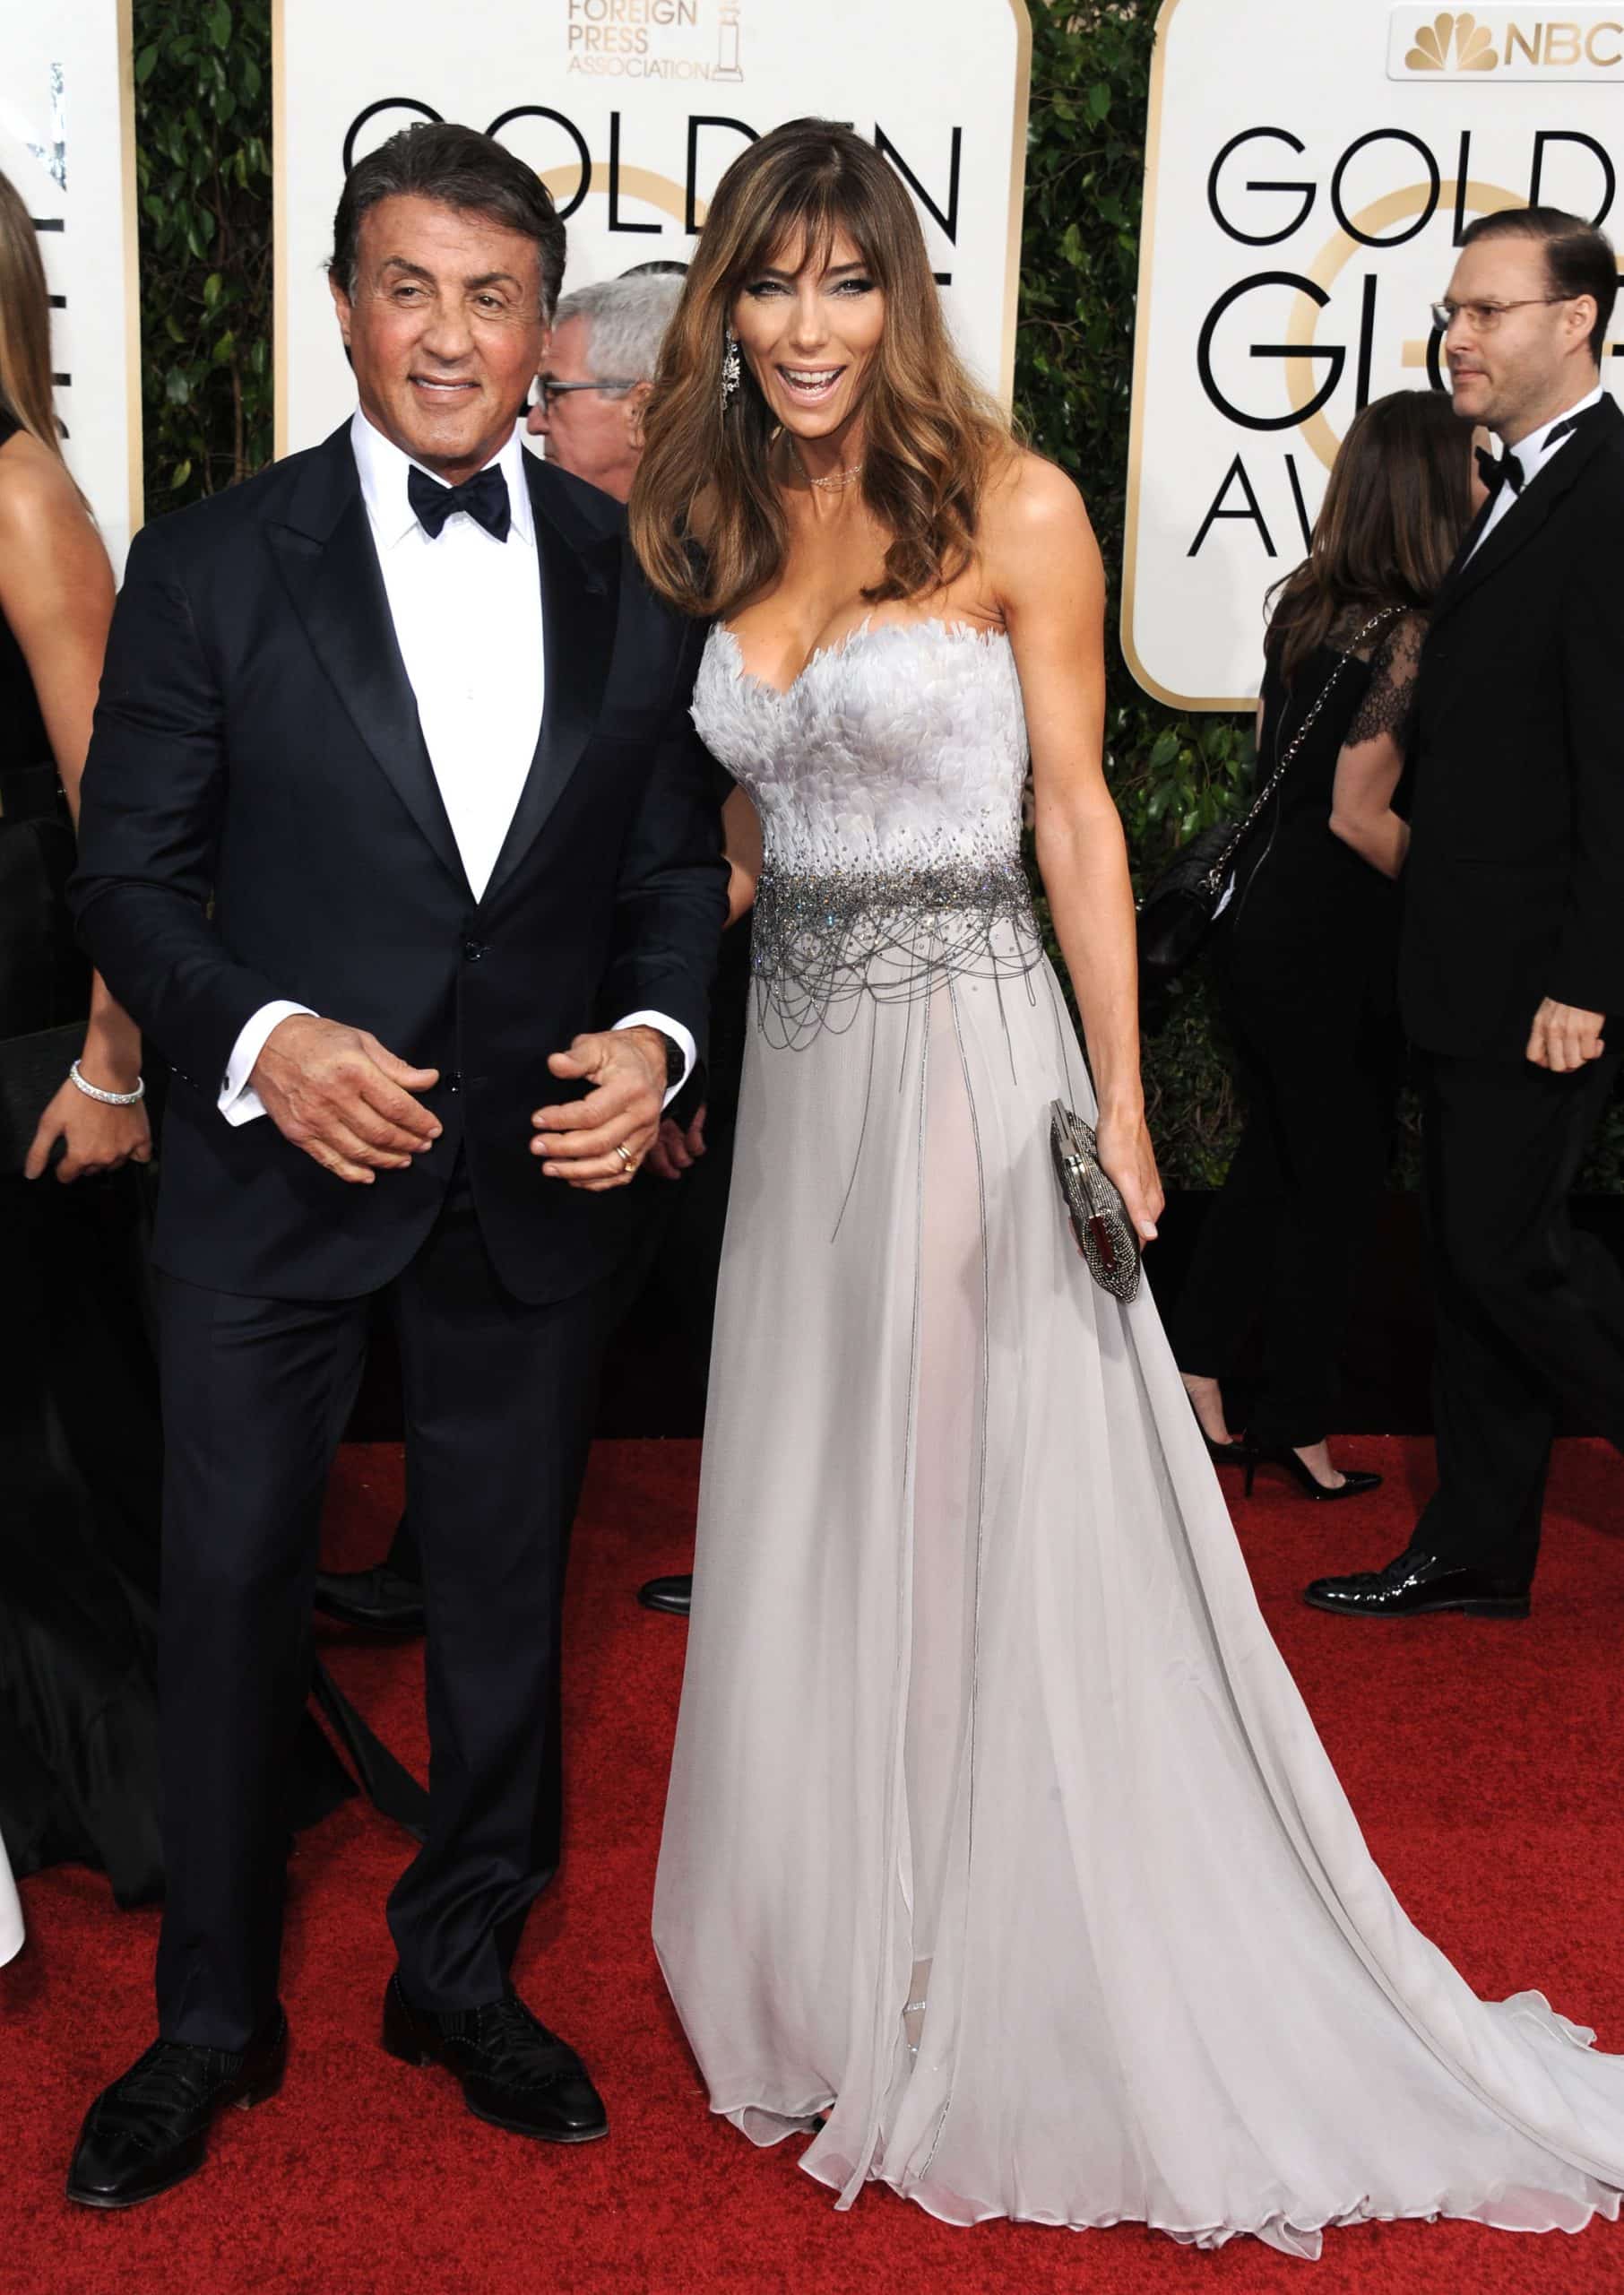 Sylvester Stallone and Jennifer Flavin arriving at the 73rd Annual Golden Globe Awards